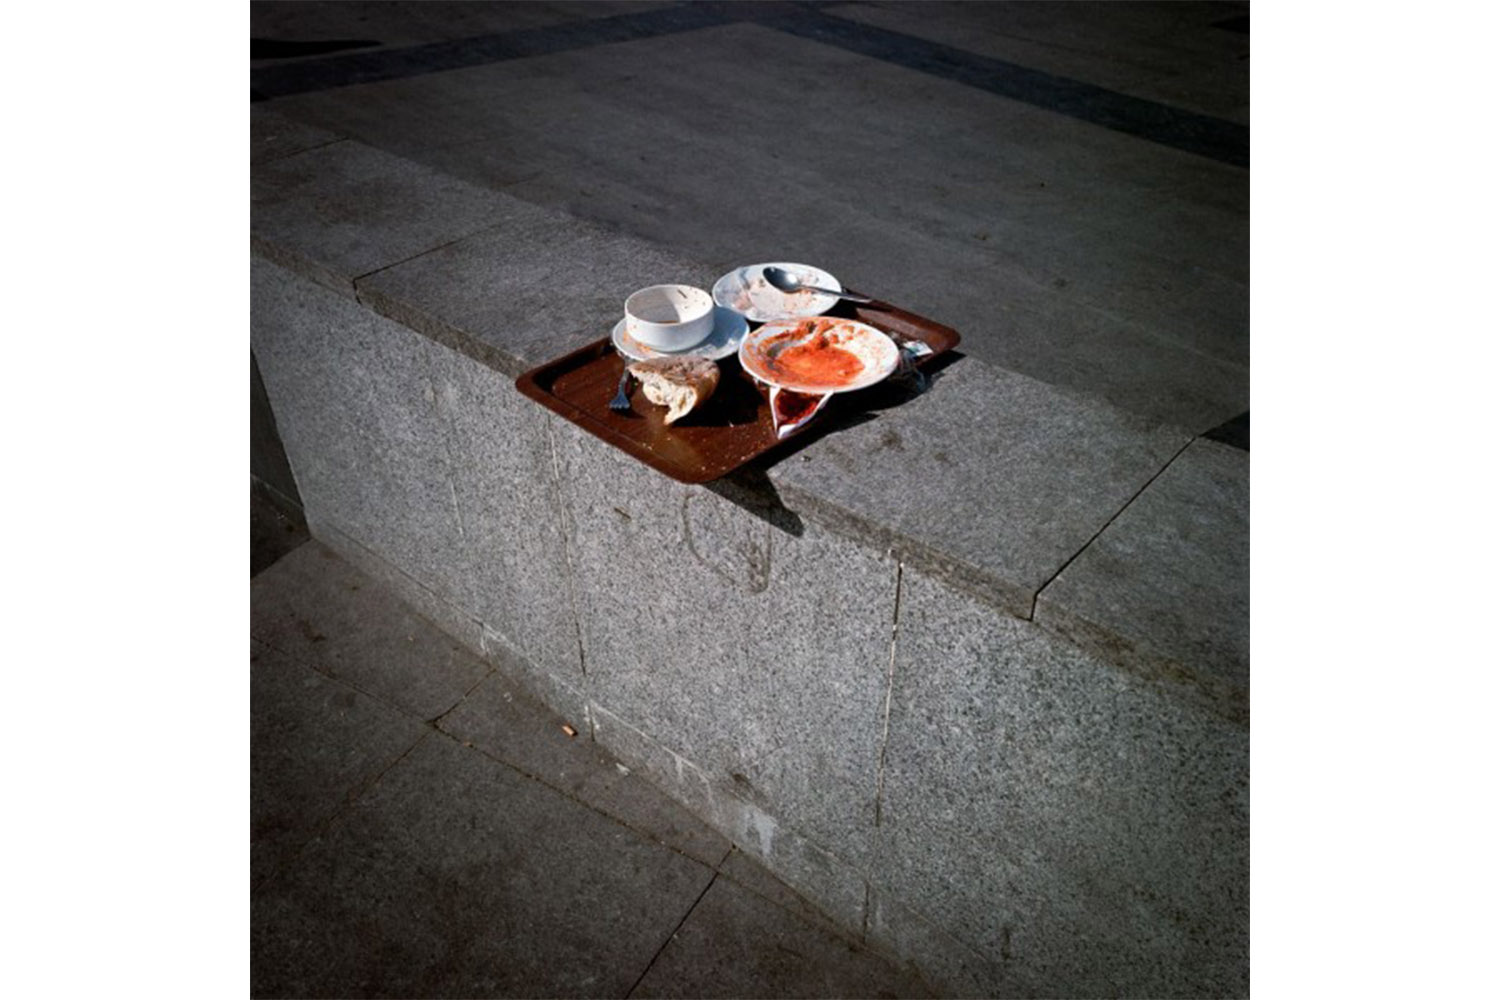 Redeployment_57, from the series ''Nothing Suprising'', 2008